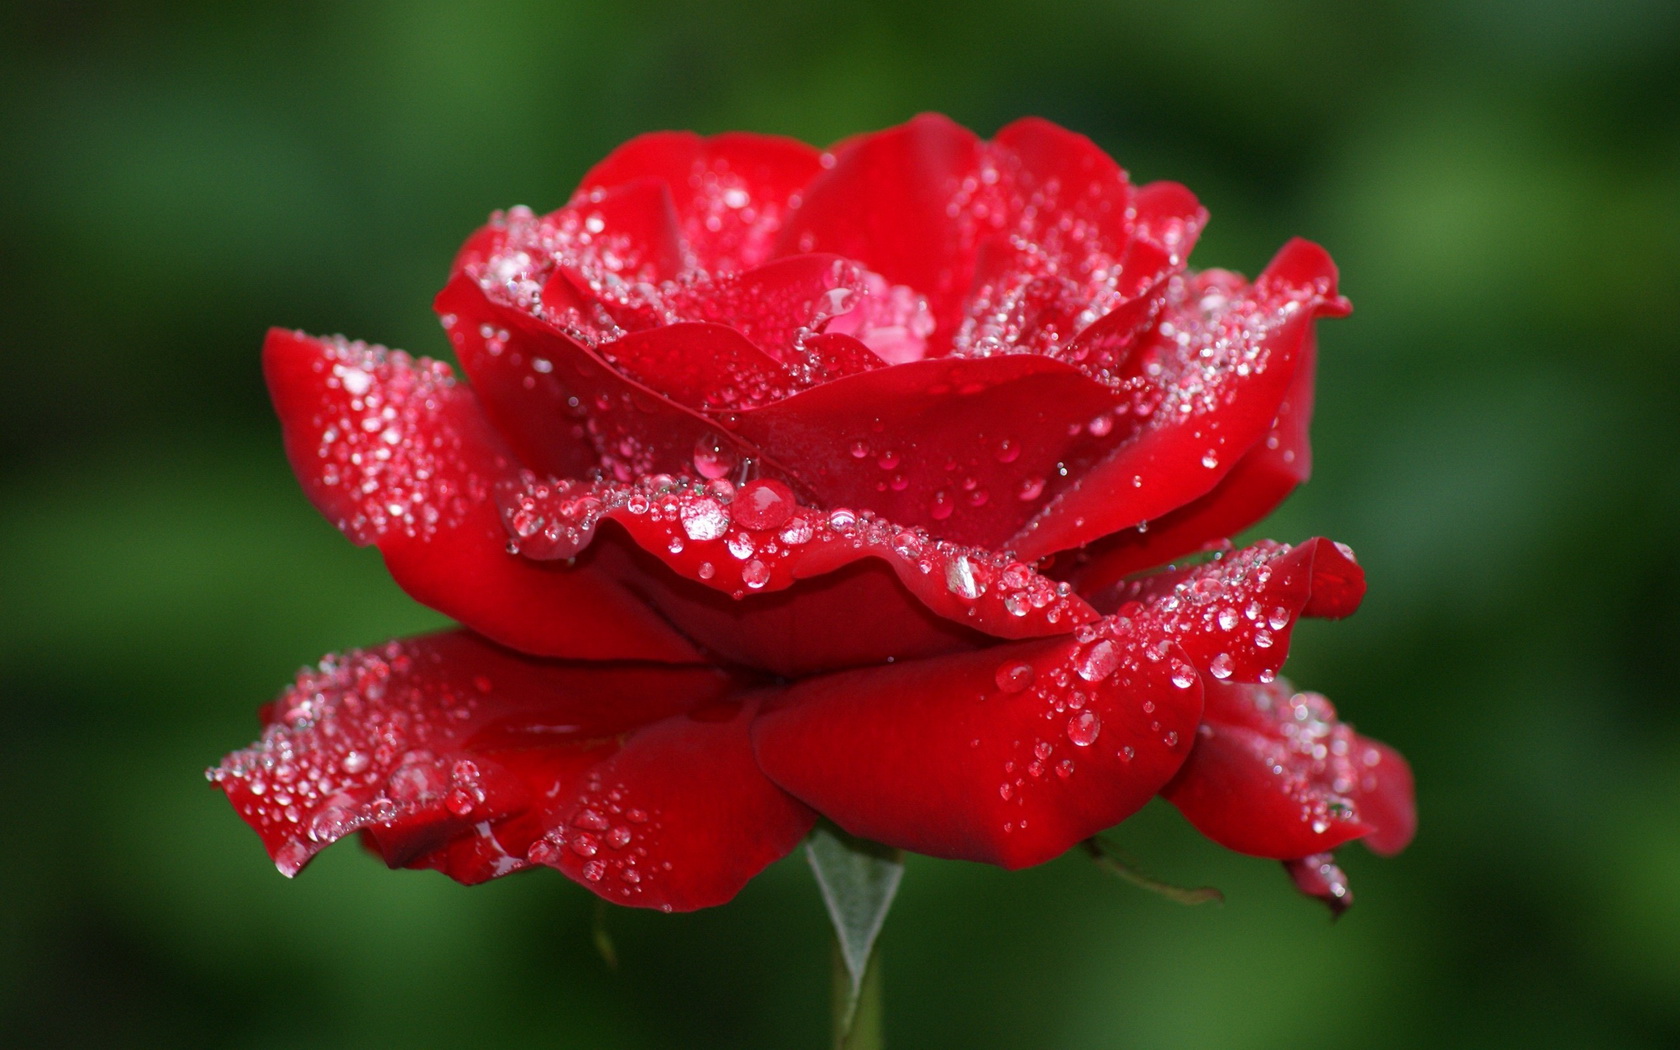 Flowers Rose Water Drops Red Wallpaper 1680x1050 Flowers beautiful photography water drops 31 ideas for 2019. flowers rose water drops red wallpaper